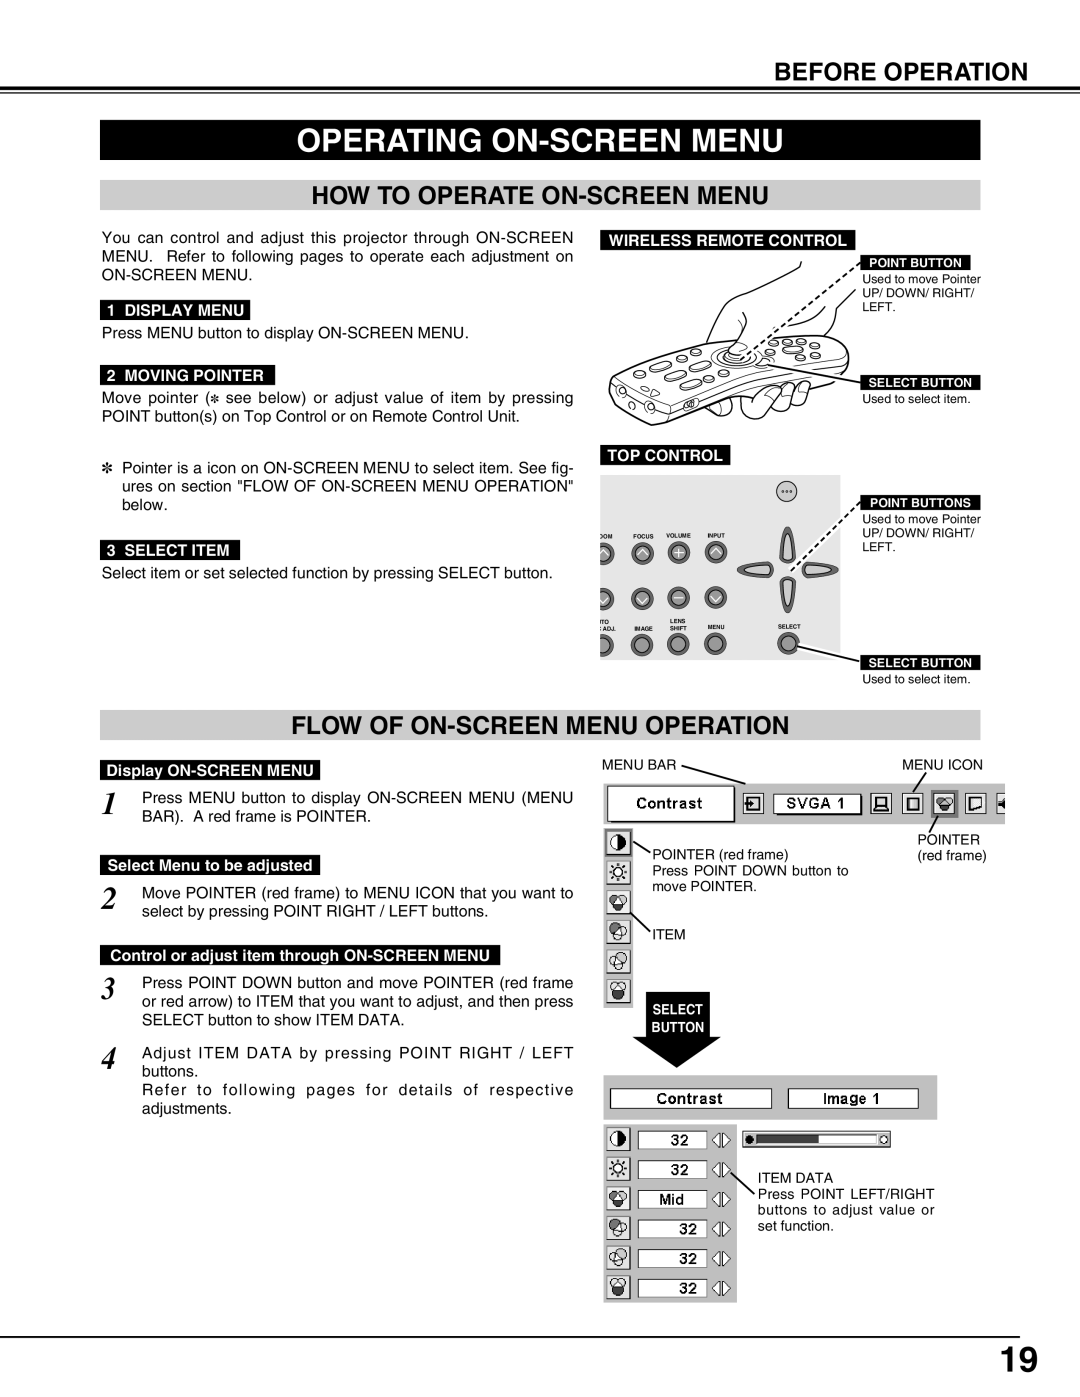 Christie Digital Systems 38-VIV302-01 user manual Operating On-Screen Menu, How To Operate On-Screen Menu, Before Operation 